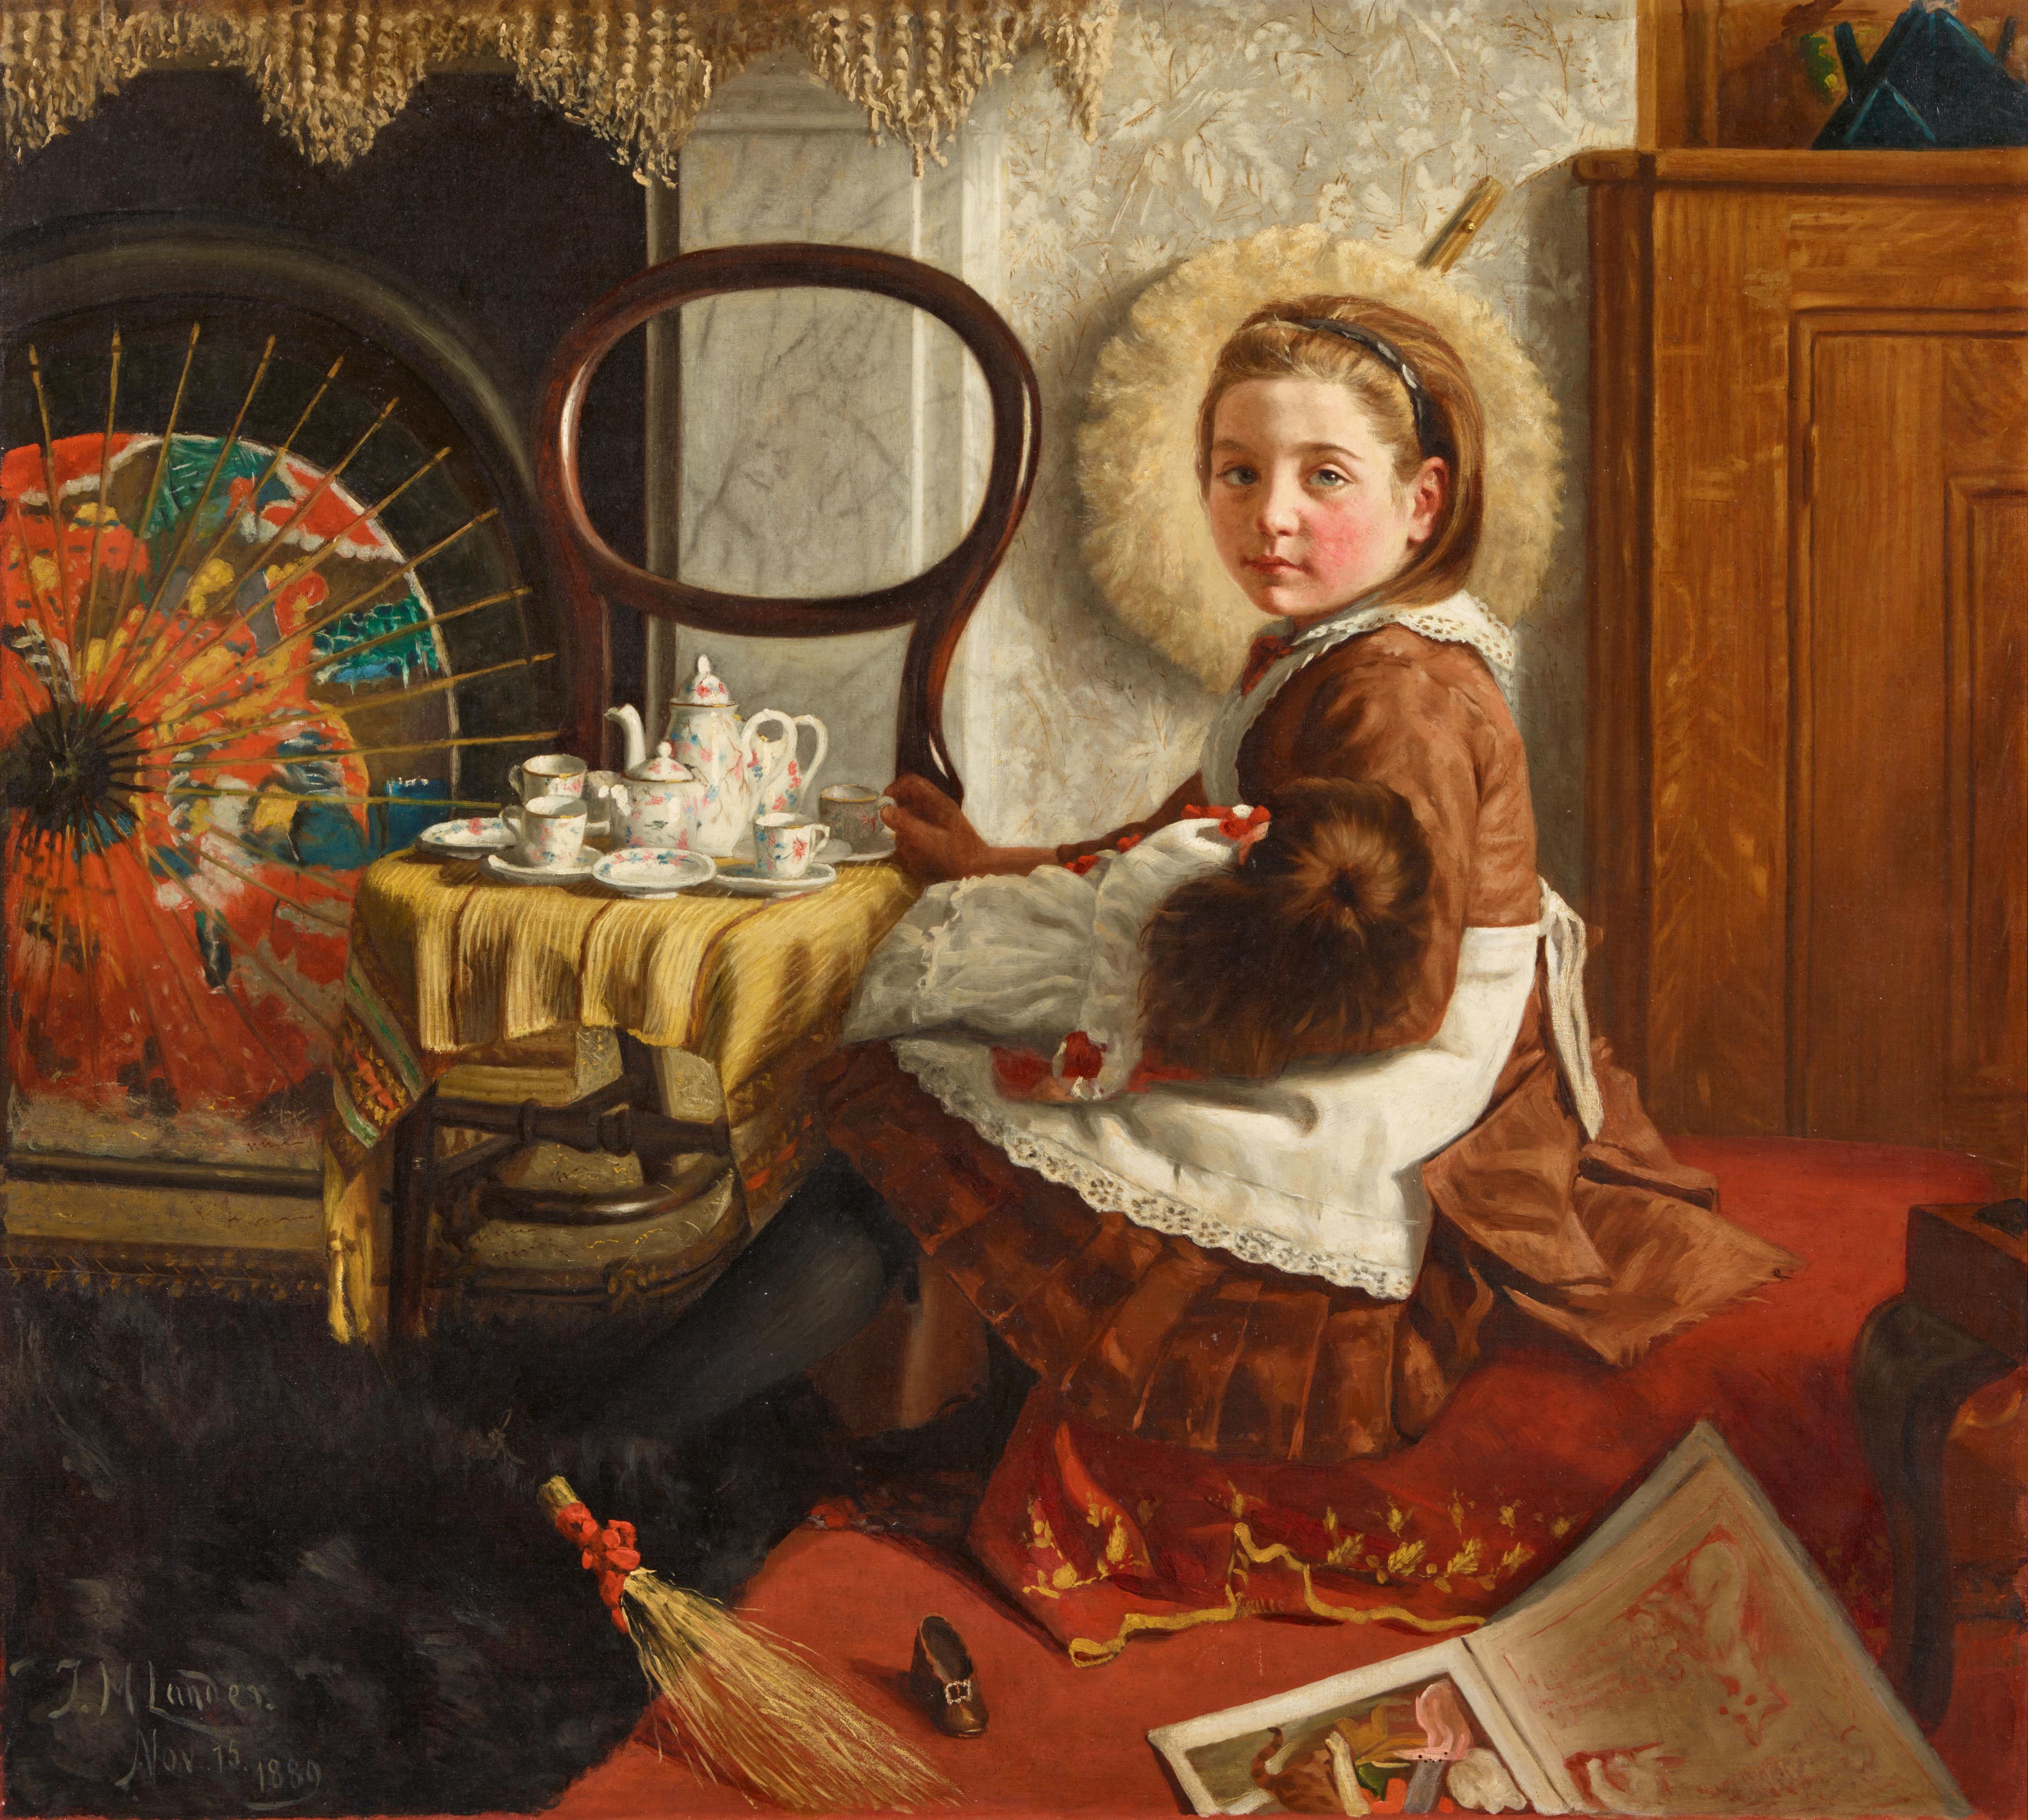 John St. Helier Lander - Portrait of Elsie Esther Cornish, aged 7, seated at a table with her doll and tea set - image-1